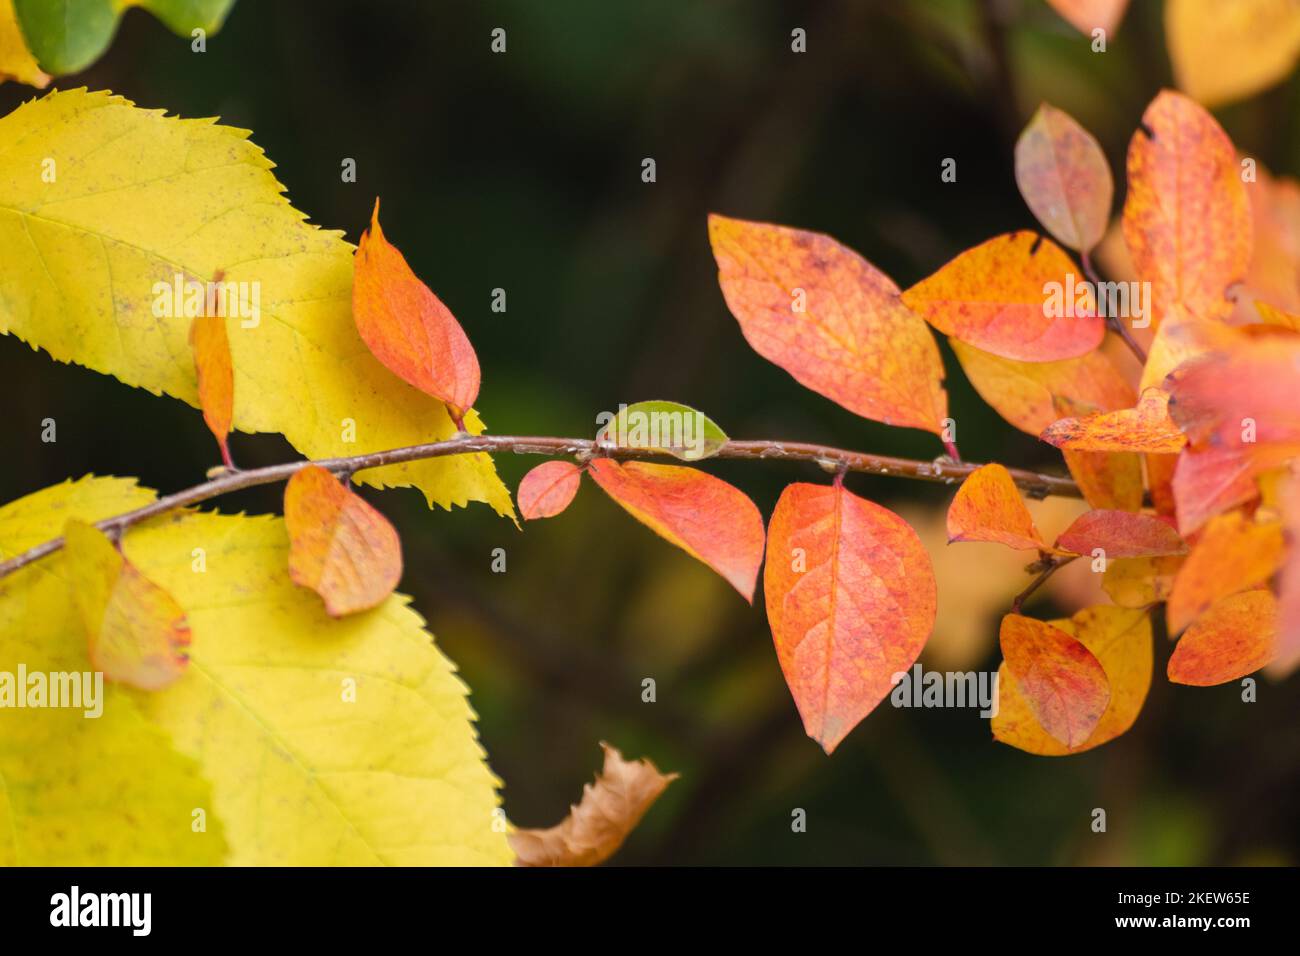 Autumn yellow and red vibrant leaves small branch close-up with dark blurred background. Autumnal forest in orange and yellow colors, nature details Stock Photo